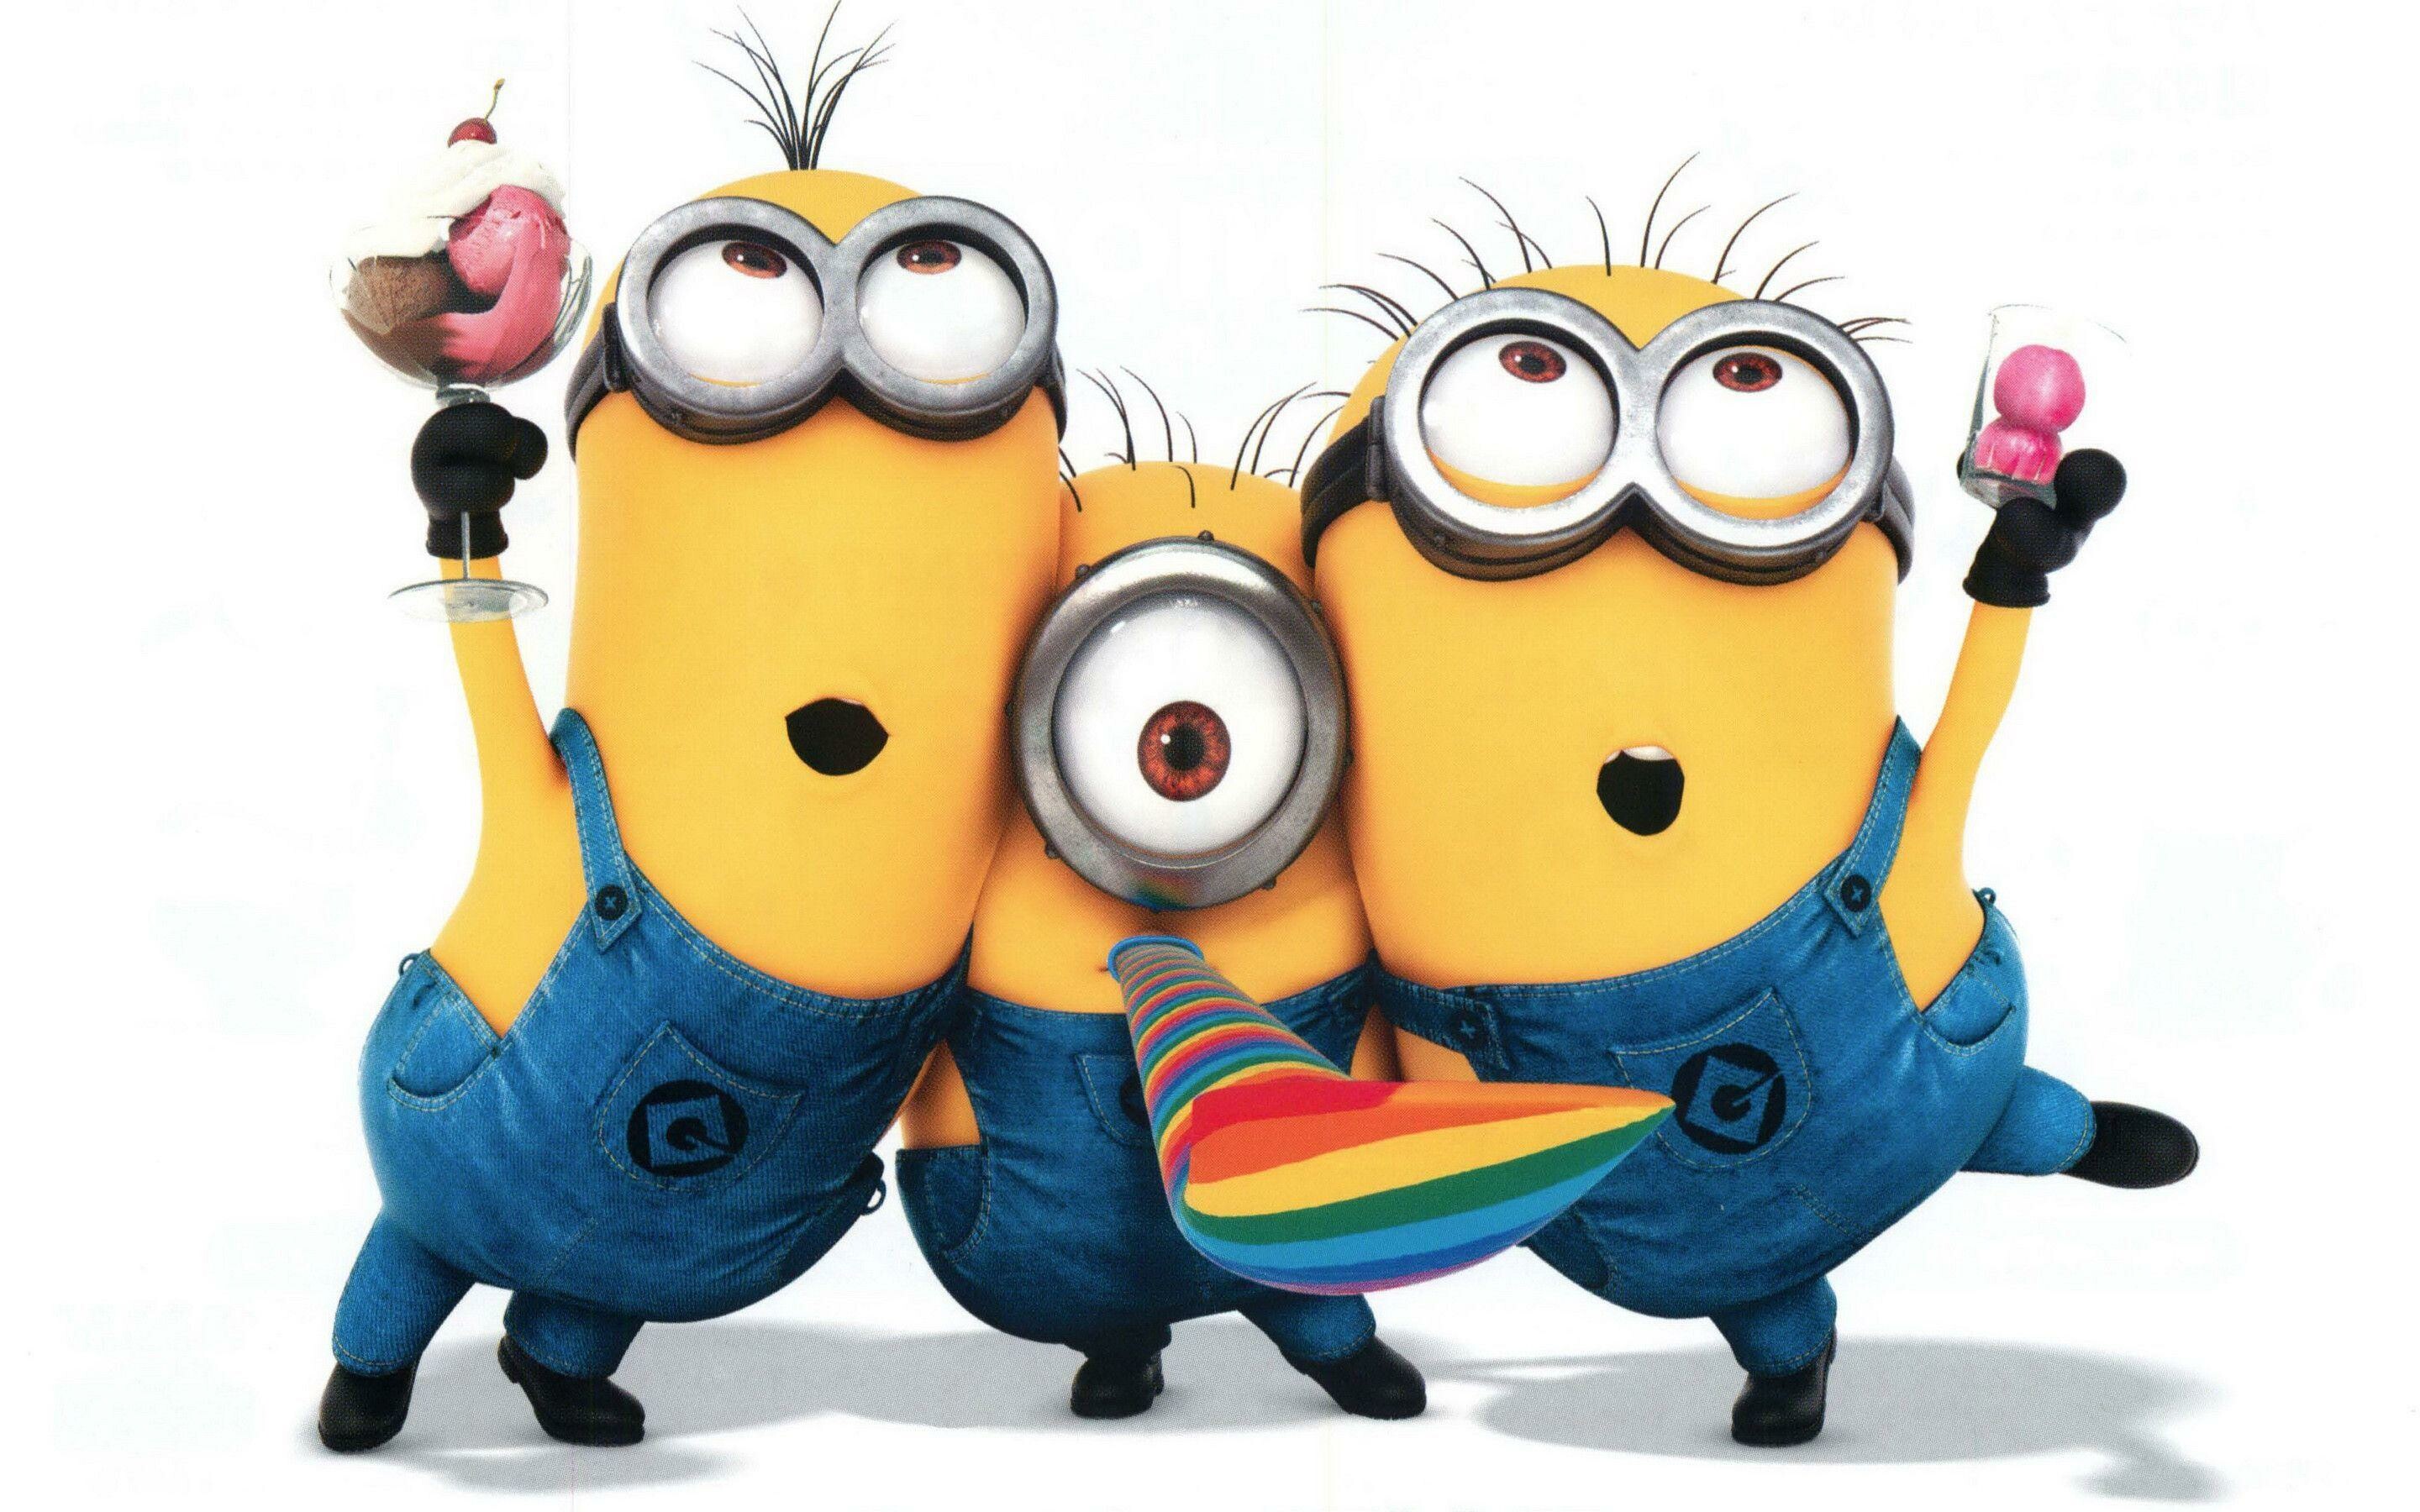 Despicable Me: Minions, The franchise began with the 2010 film of the same name. 2880x1800 HD Wallpaper.